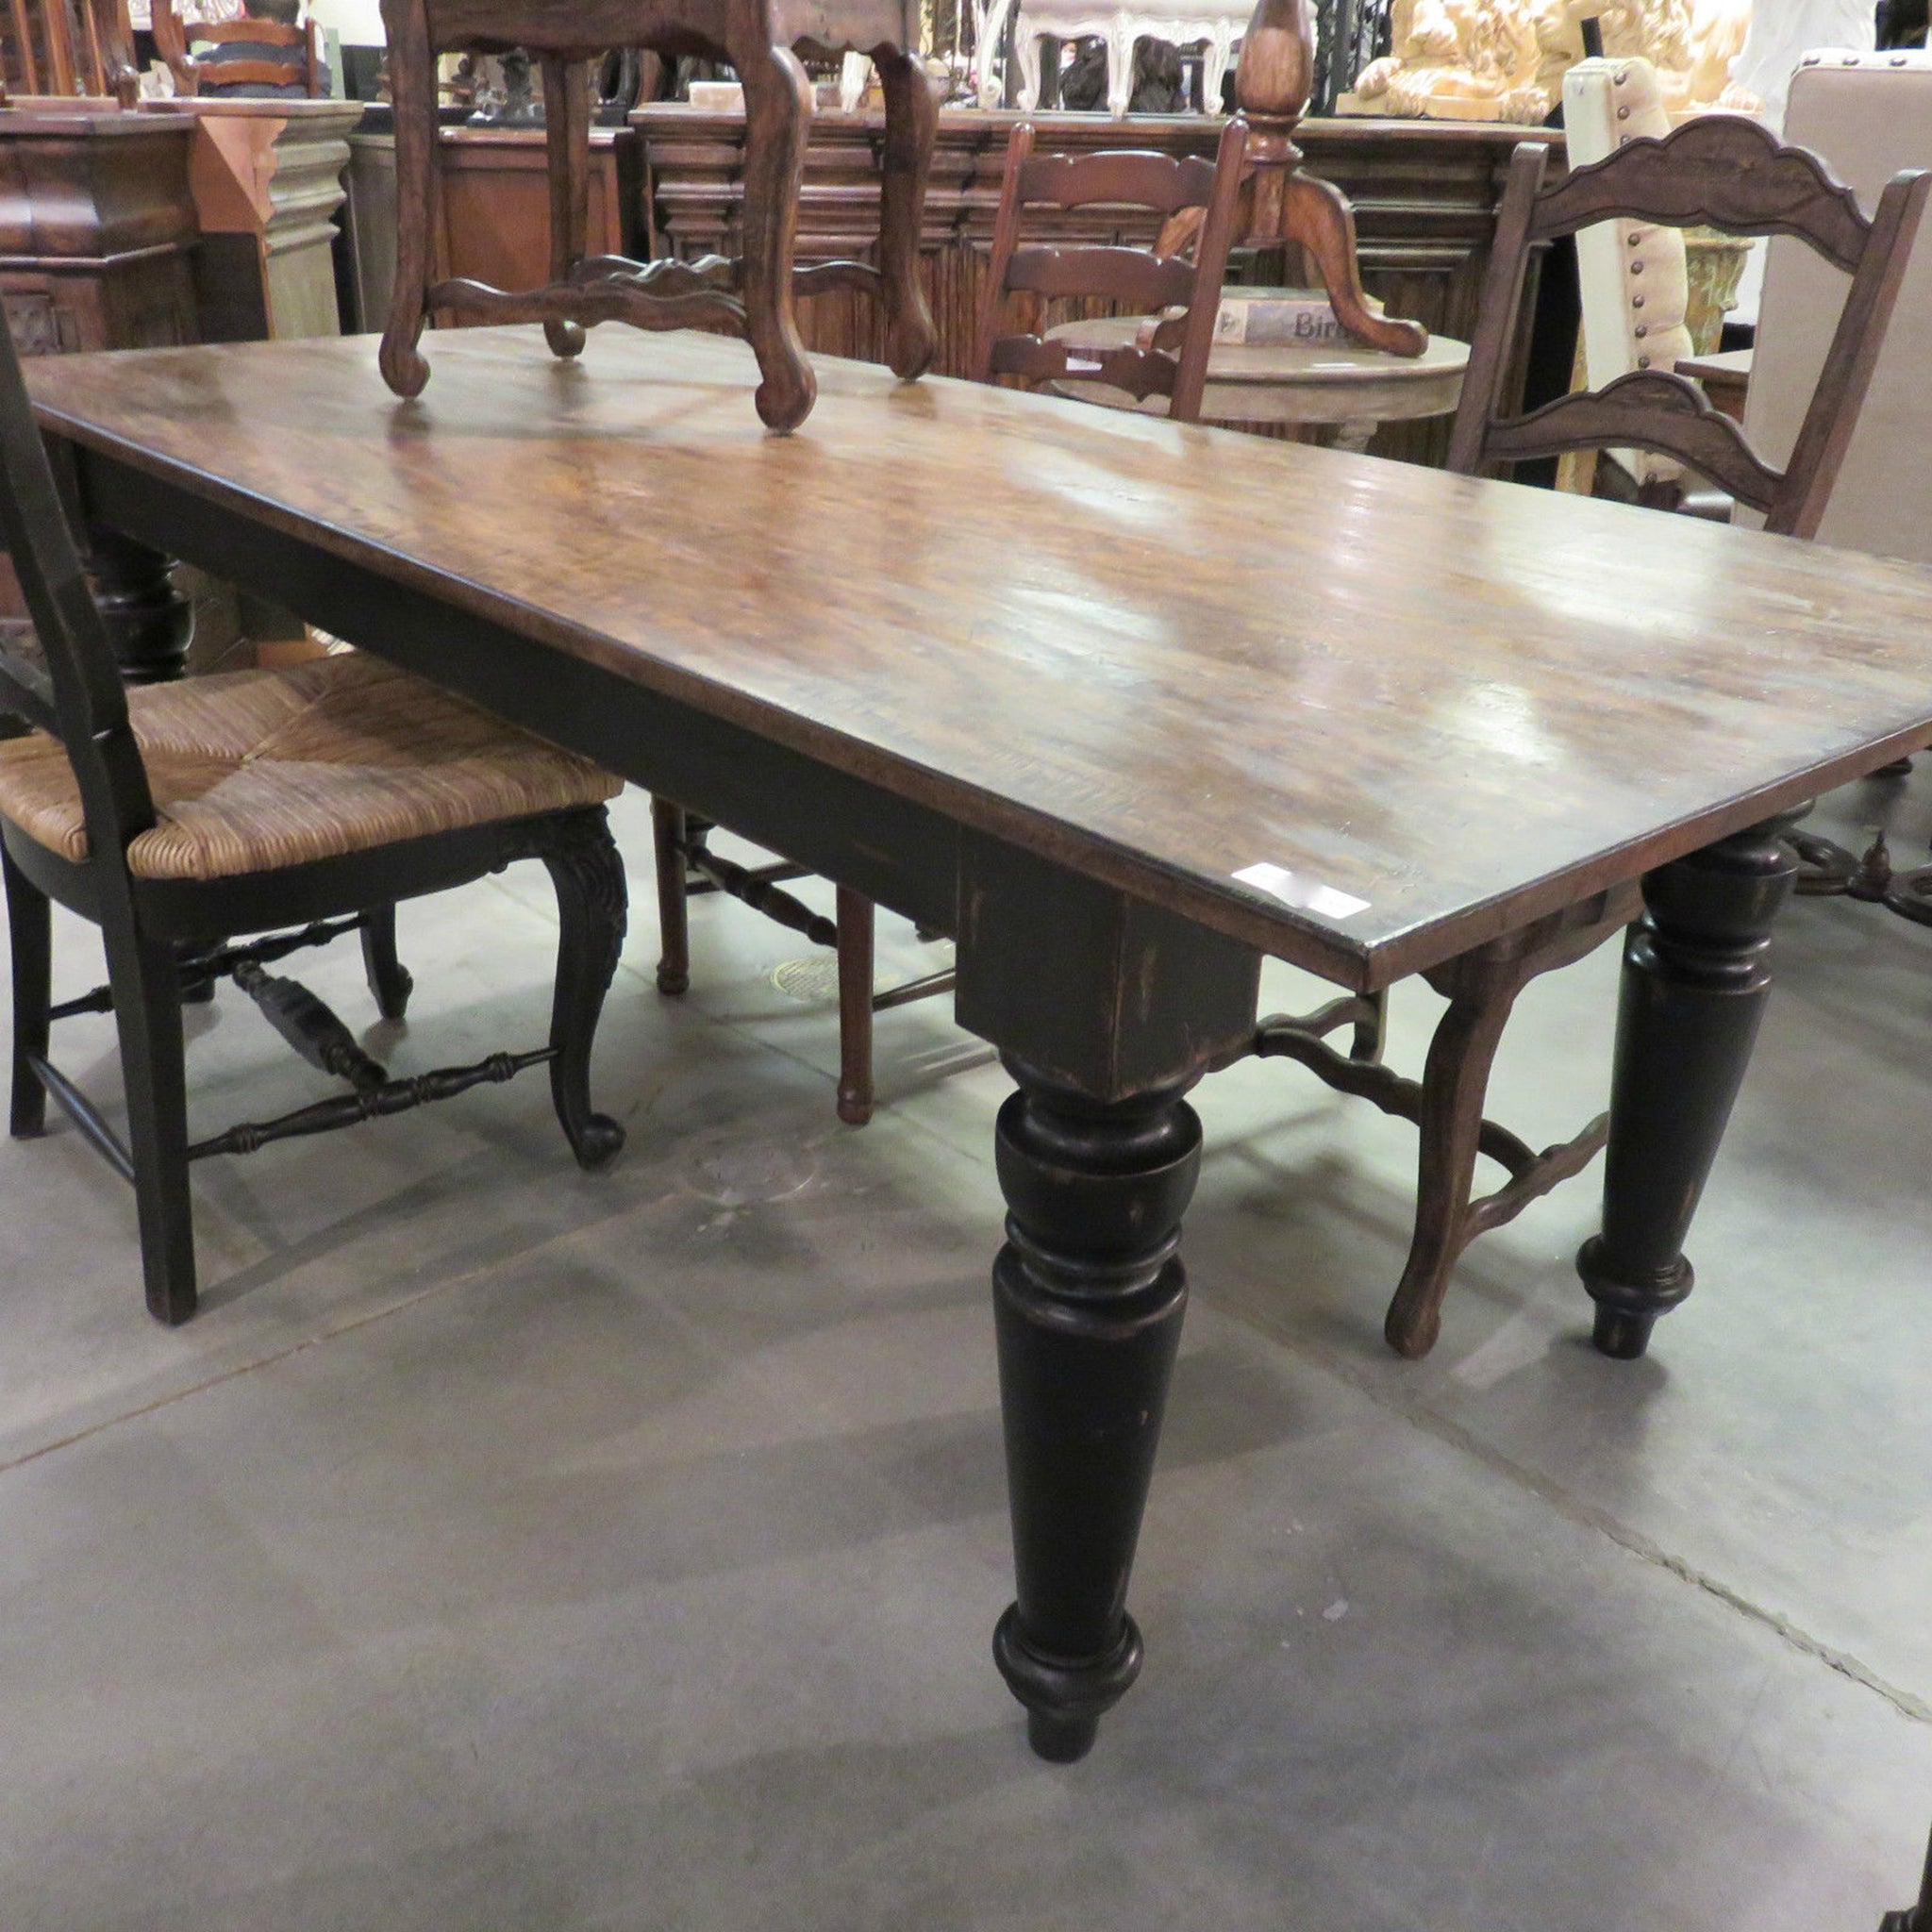 Rustic Farmhouse Dining Table 84 Black Distressed Reclaimed Wood Top Furniture On Main